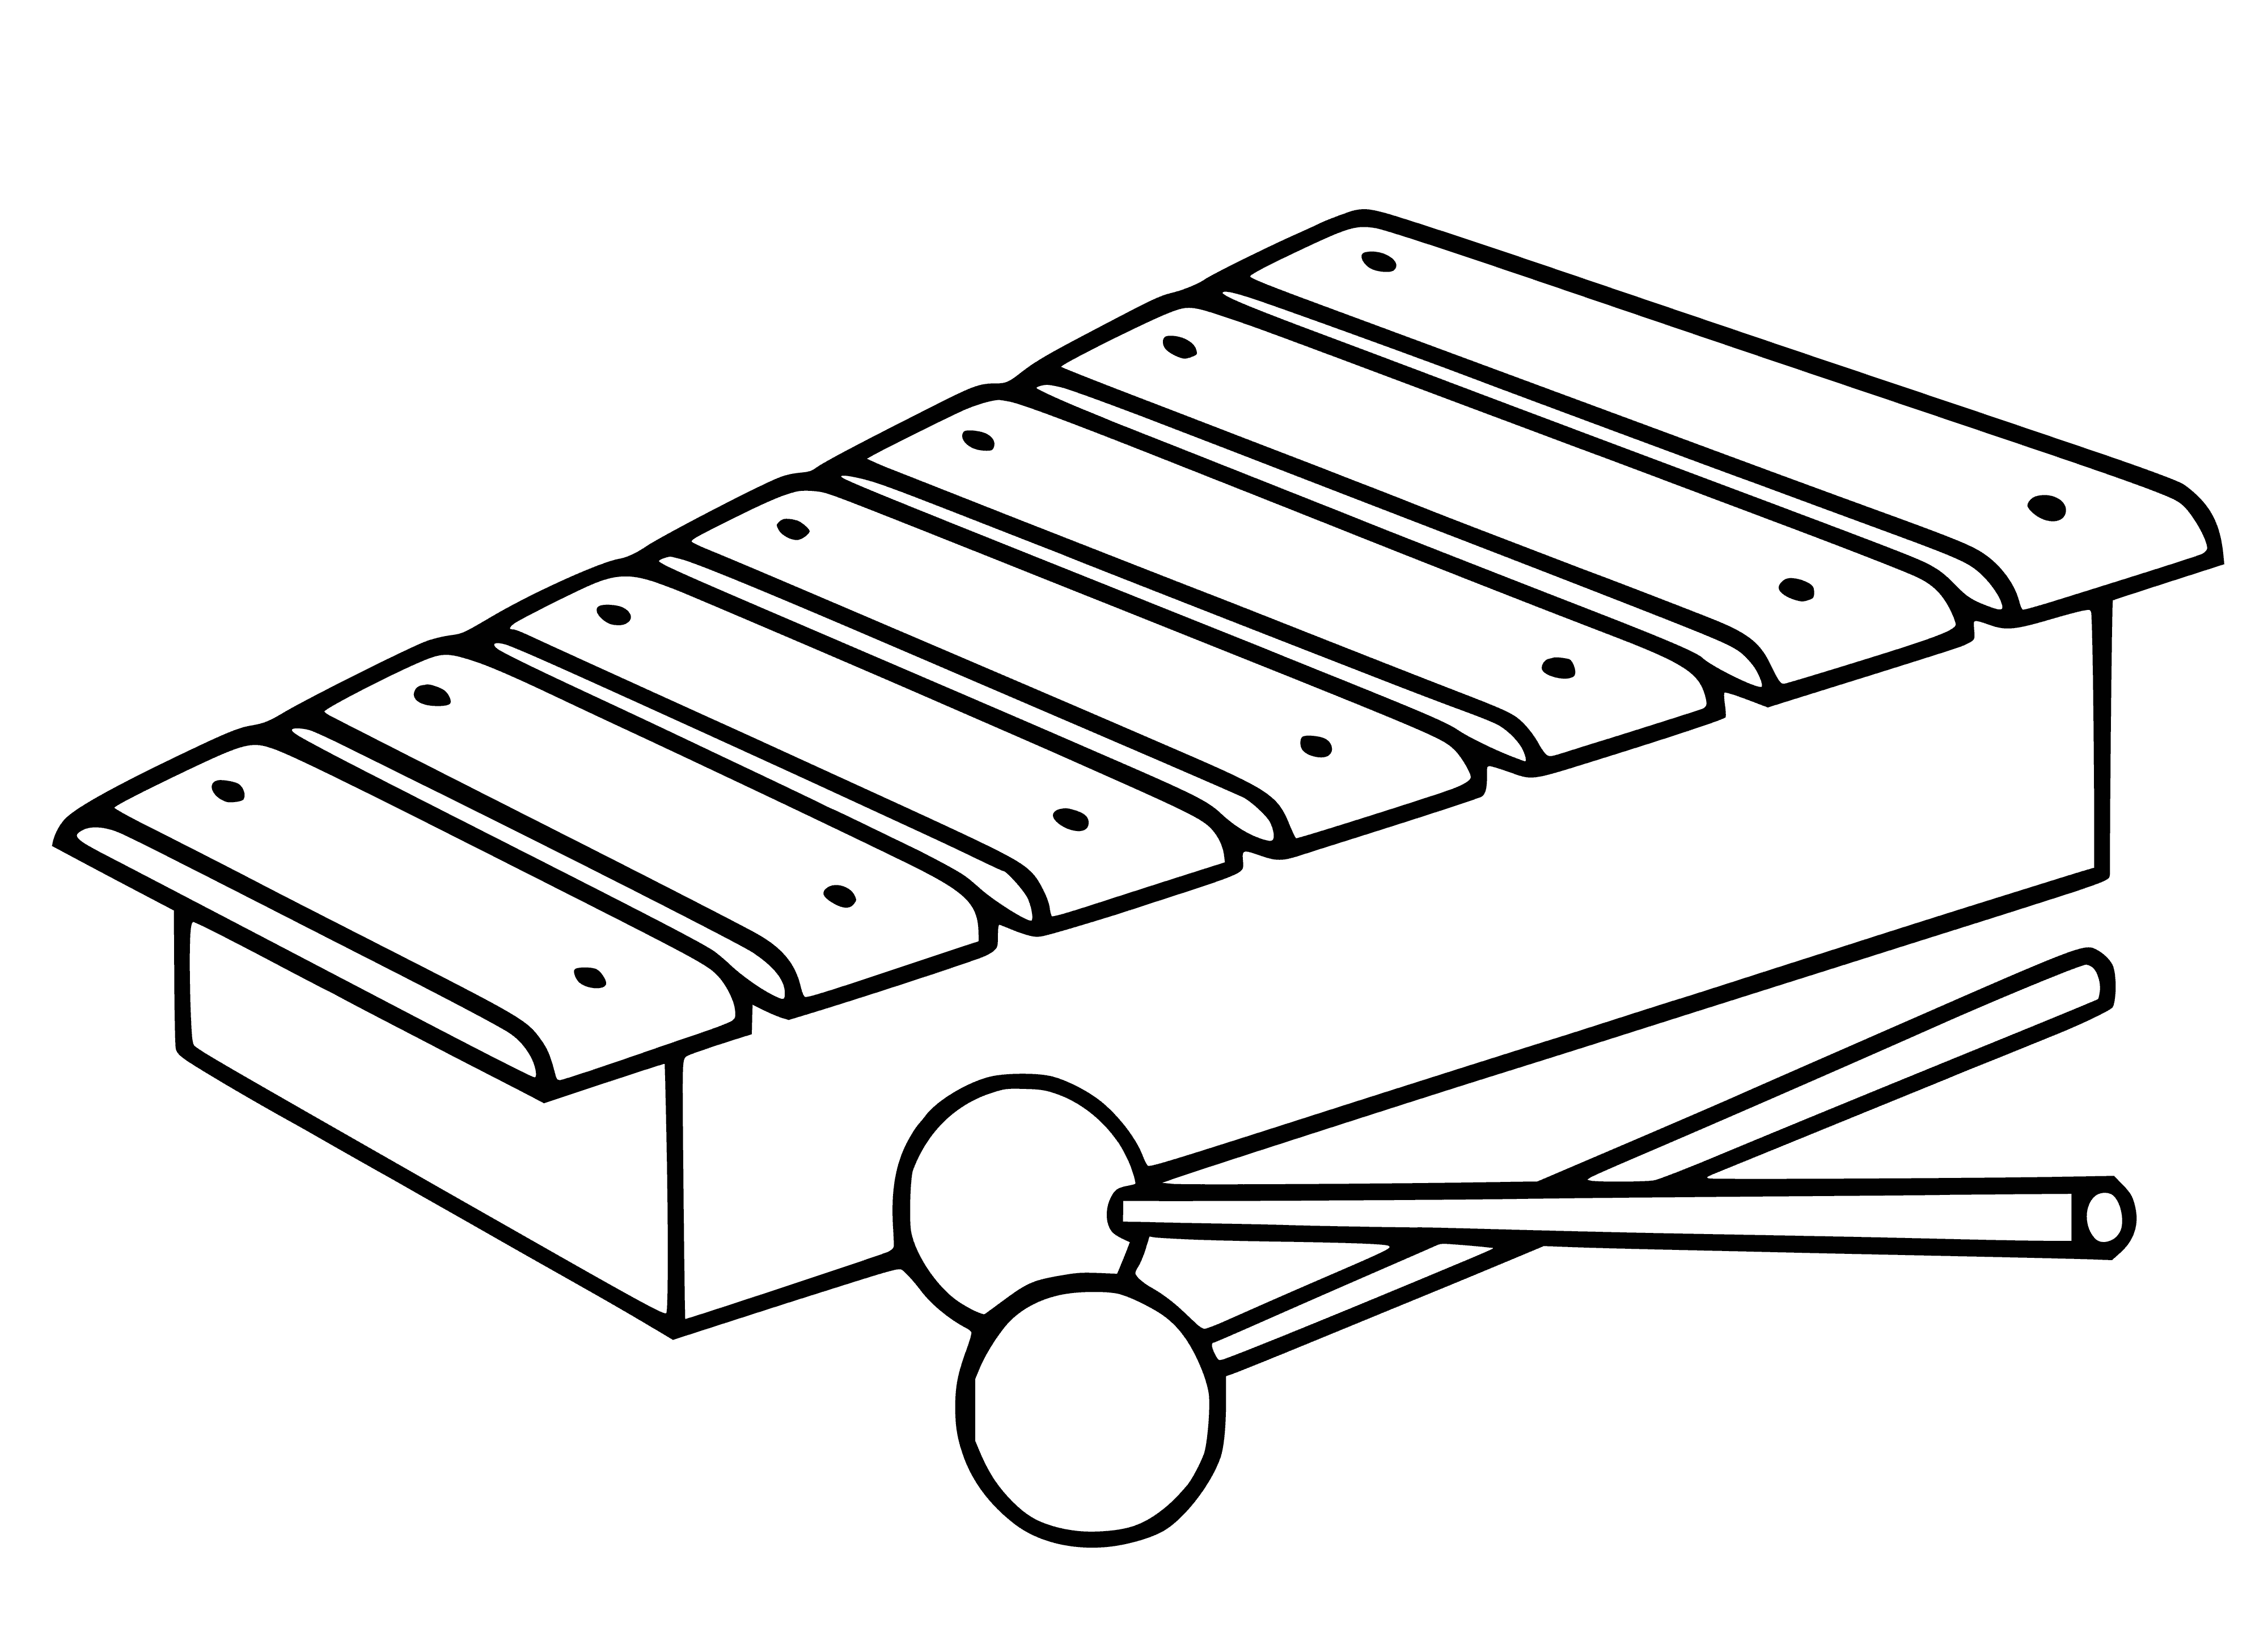 coloring page: Wooden instrument of graduated tuned bars struck with mallets to make music. #xylophone